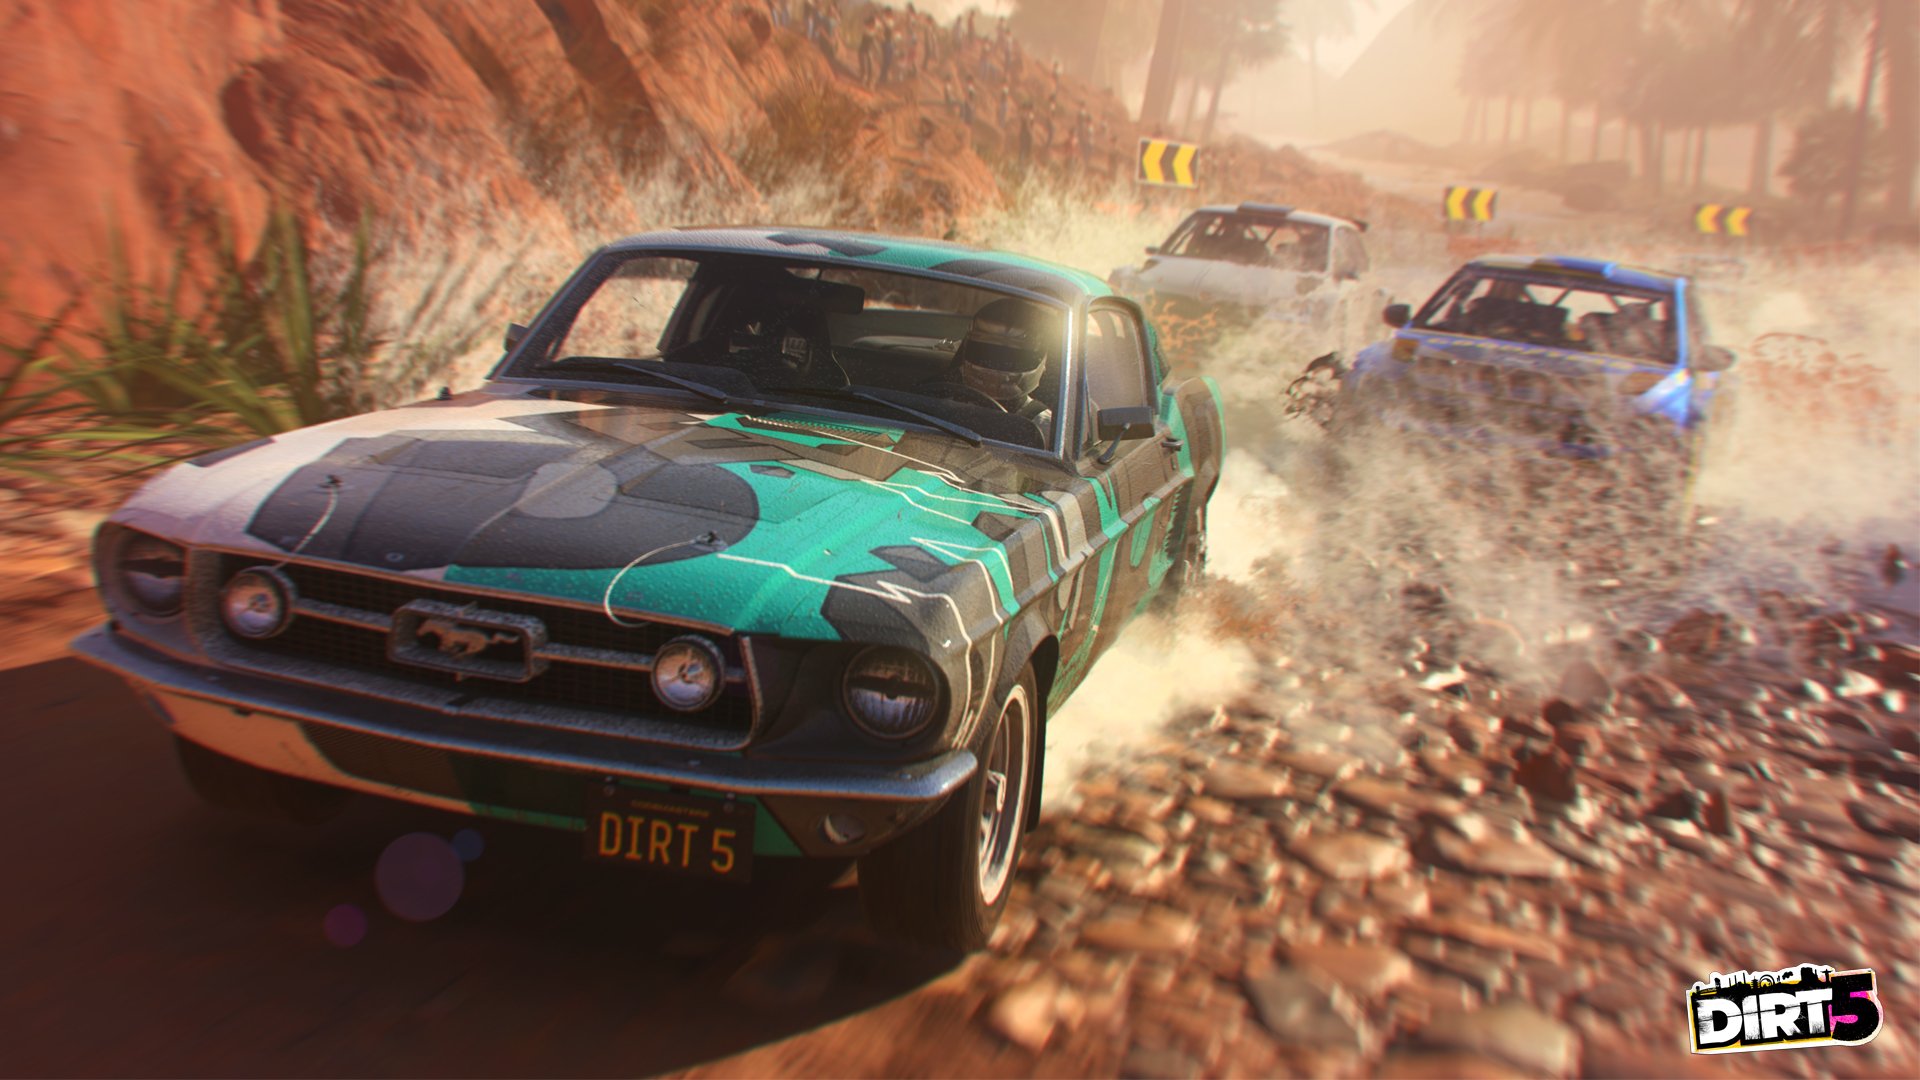  How to pre-order Dirt 5 – All versions, prices, and bonuses 